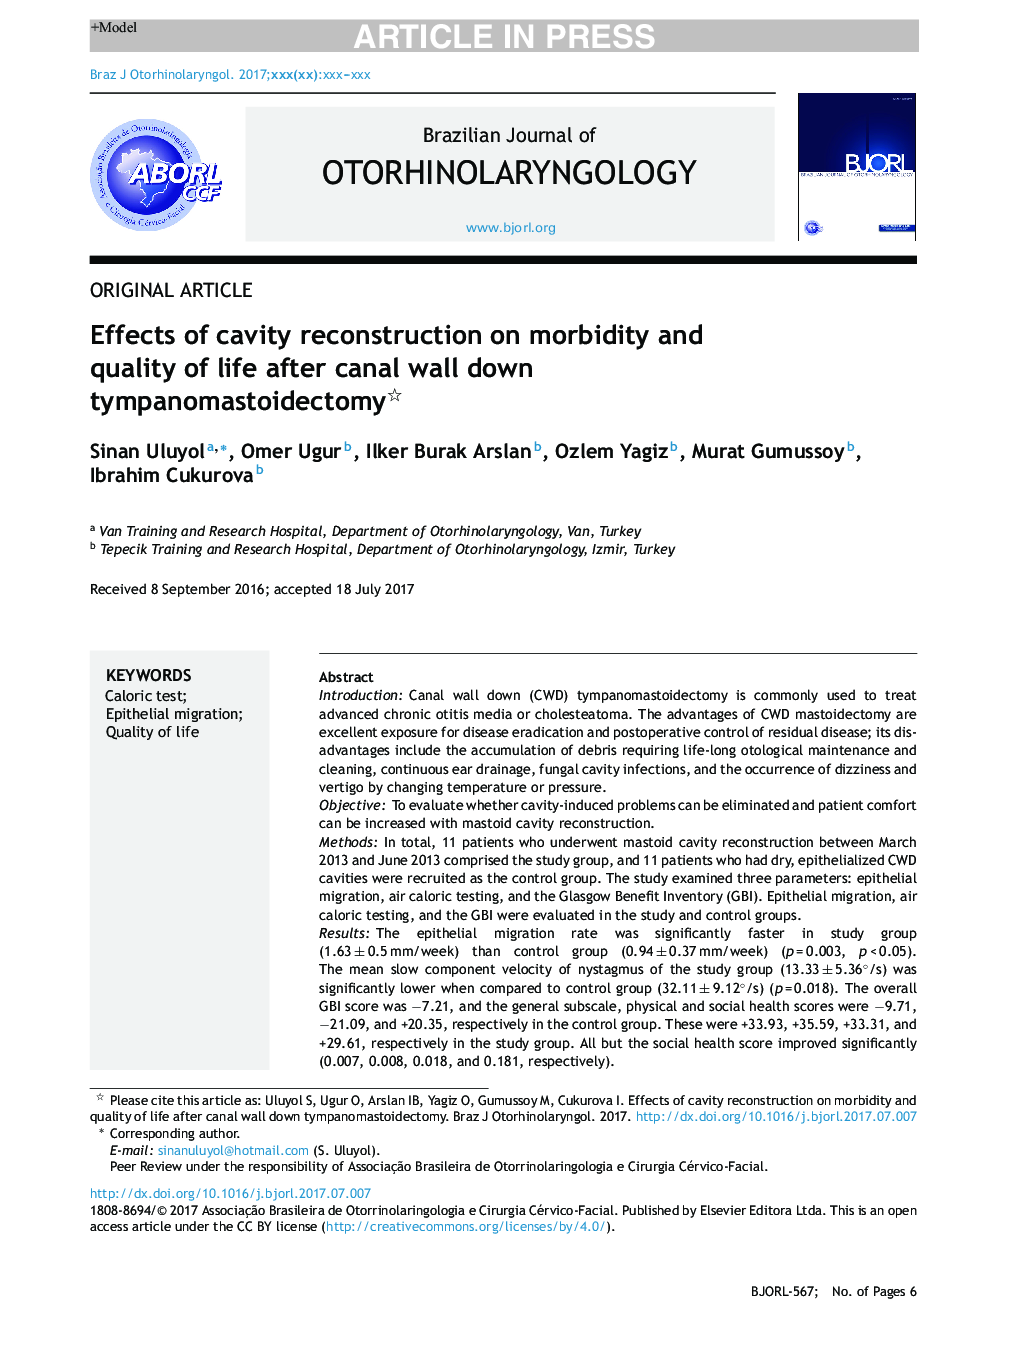 Effects of cavity reconstruction on morbidity and quality of life after canal wall down tympanomastoidectomy